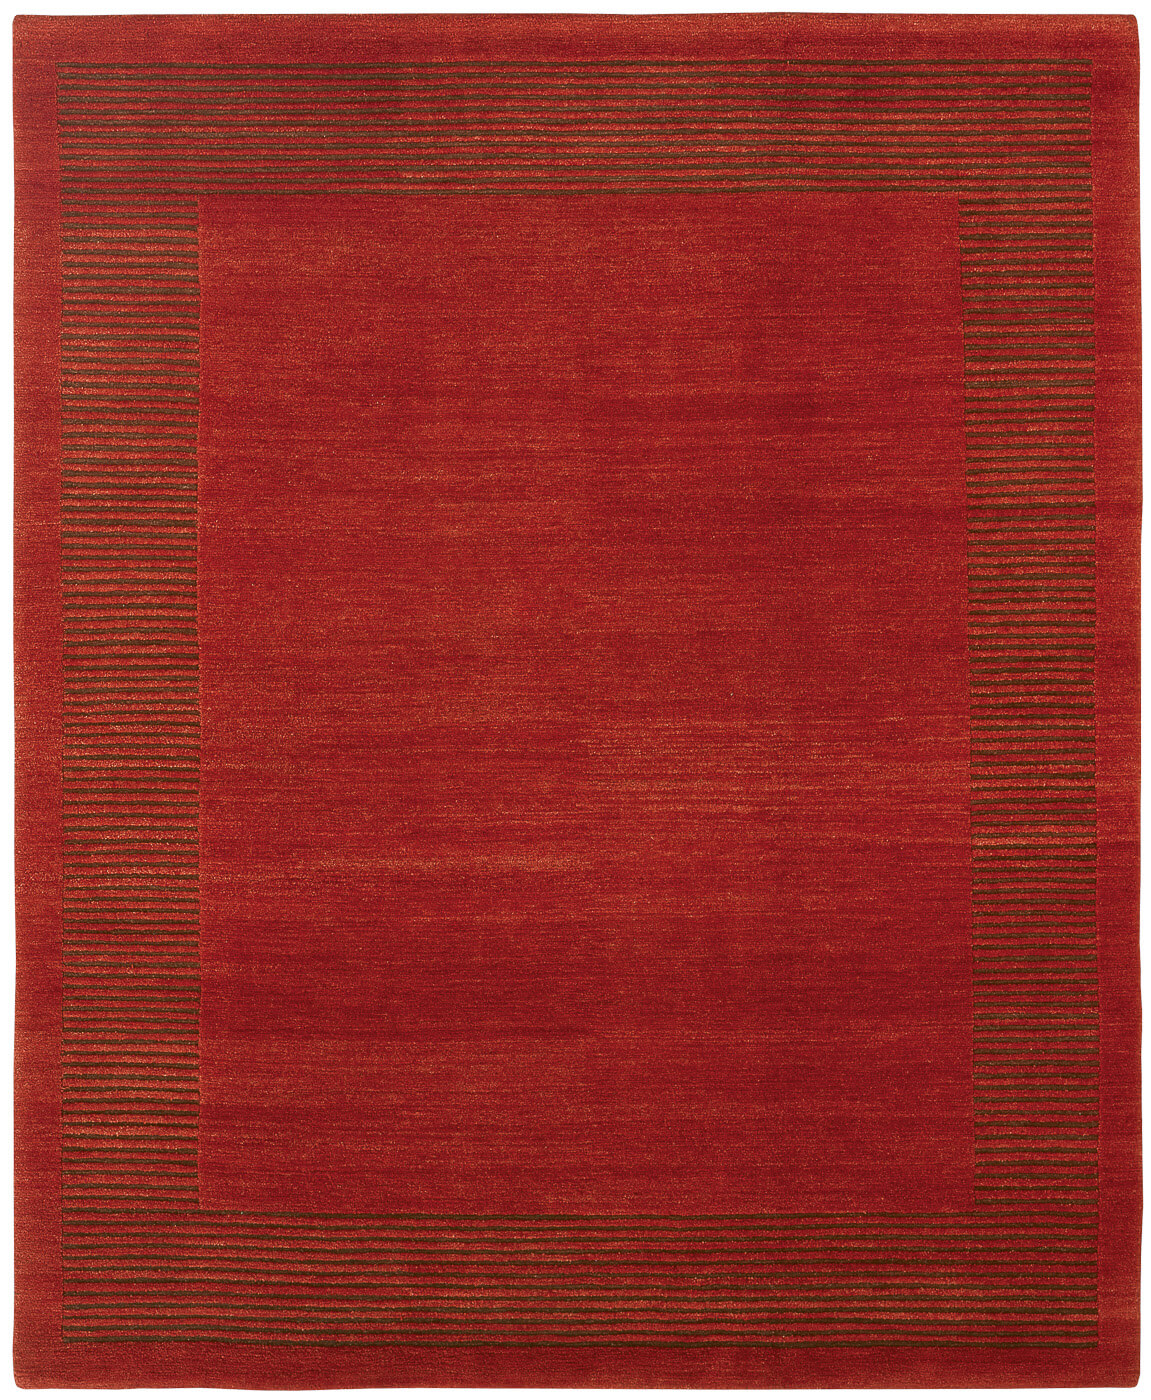 Border Red Hand-woven Luxury Rug ☞ Size: 200 x 300 cm